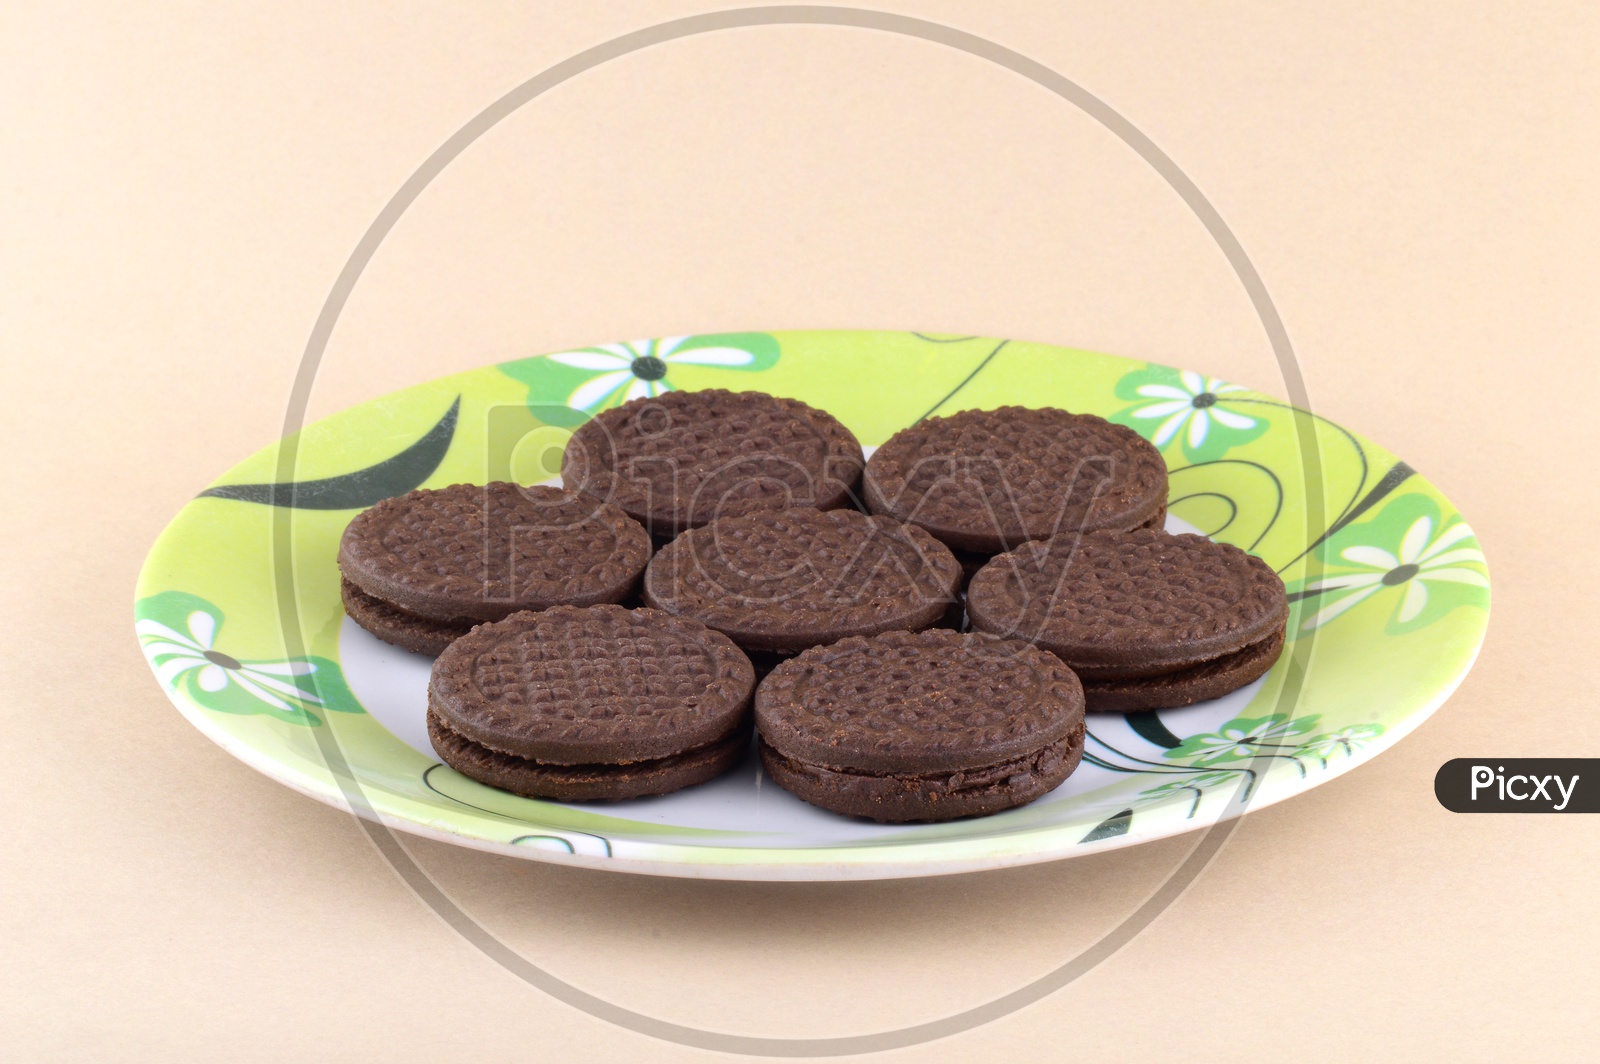 Brown chocolate sandwich biscuits with cream filling in plate